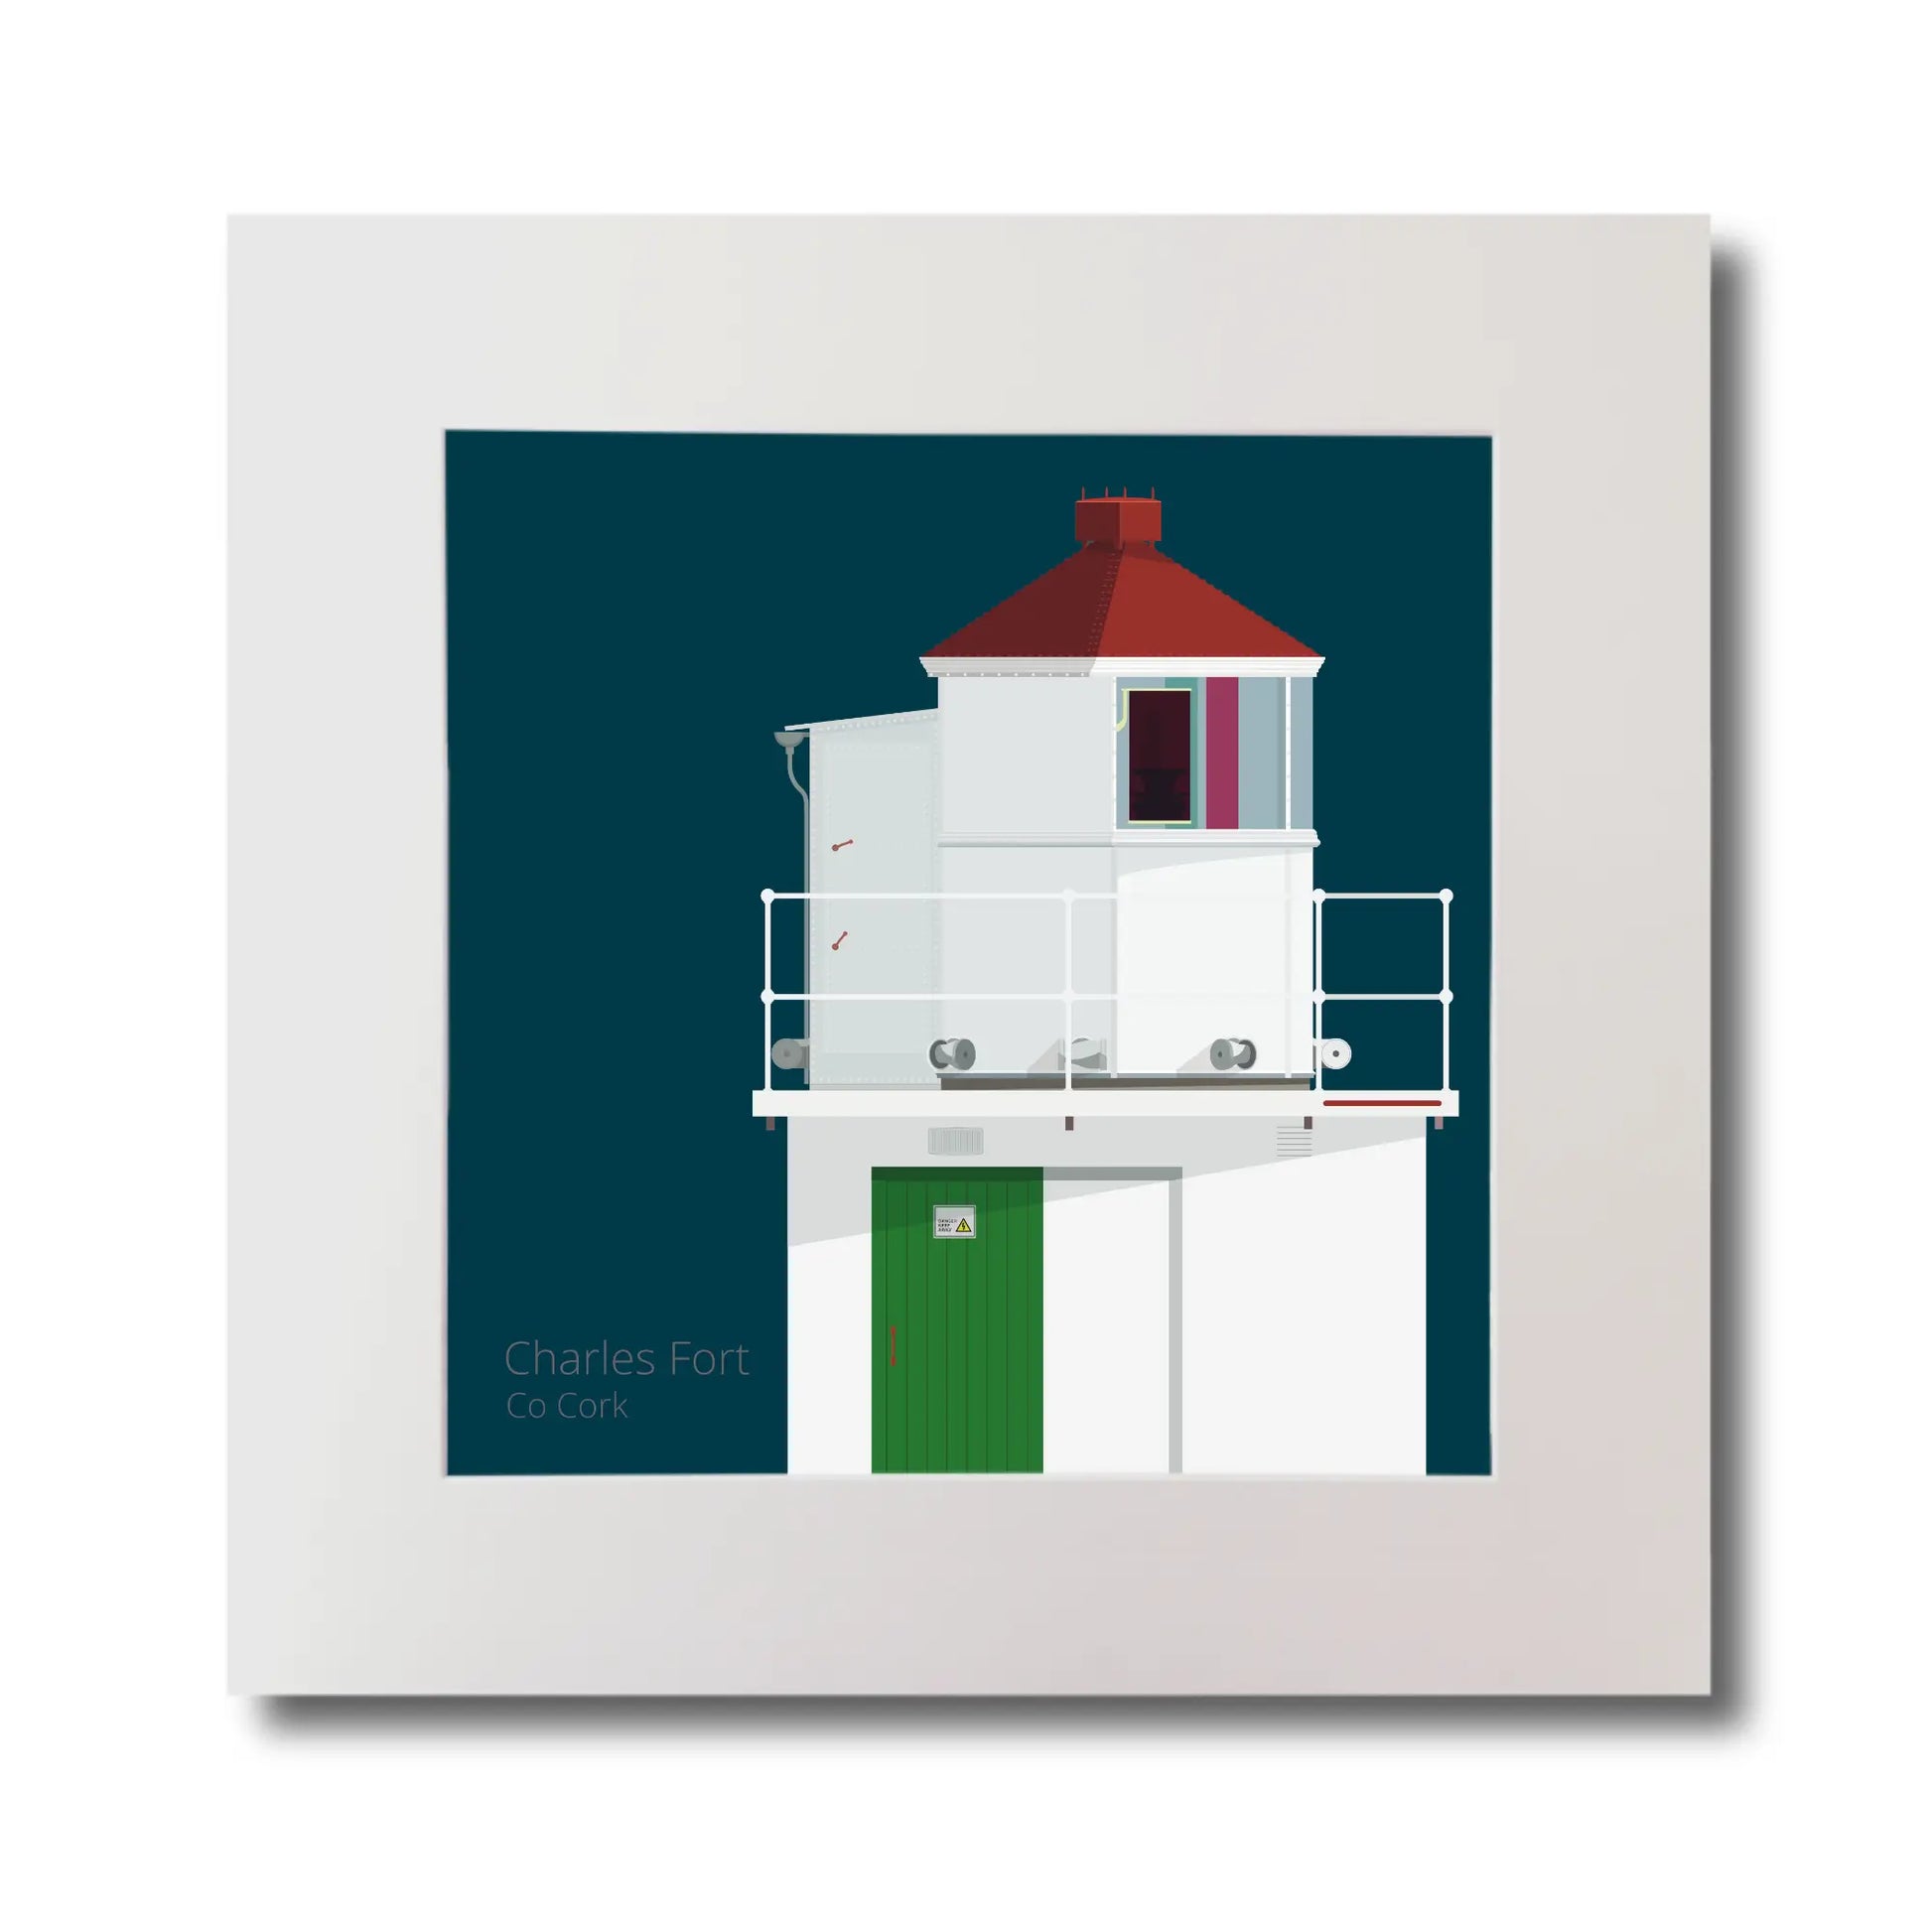 Illustration of Charles Fort lighthouse on a midnight blue background, mounted and measuring 30x30cm.